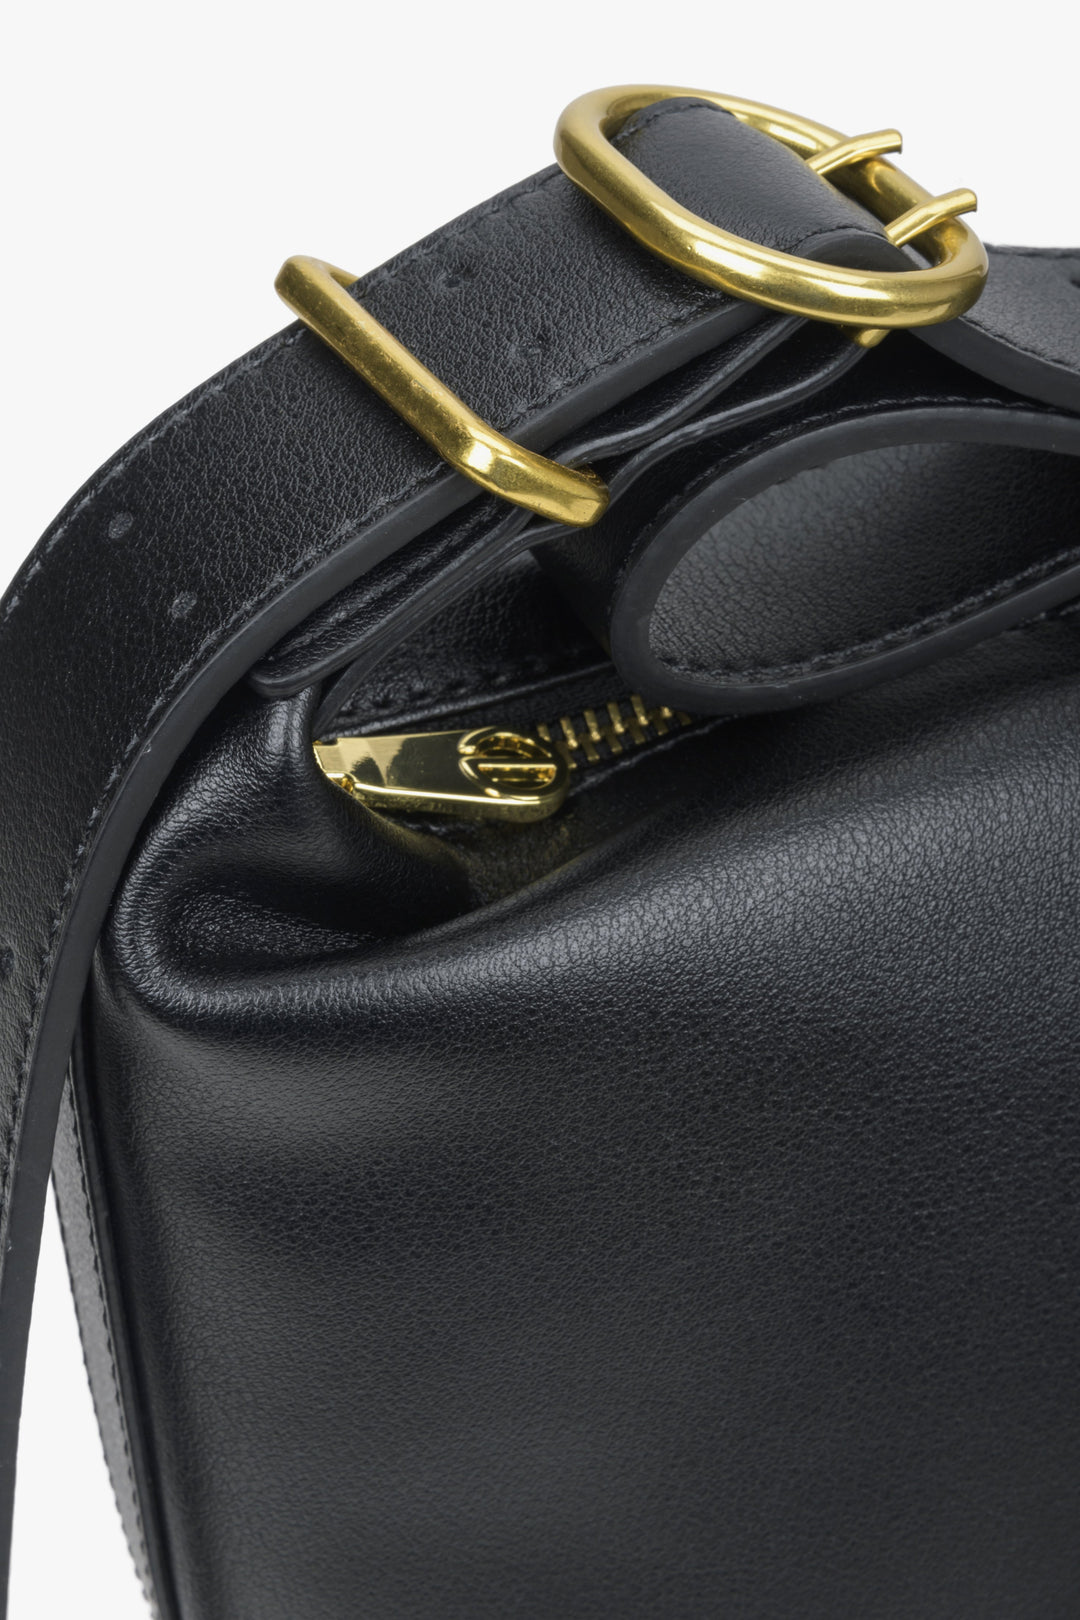 Leather women's bucket-style bag in black colour.